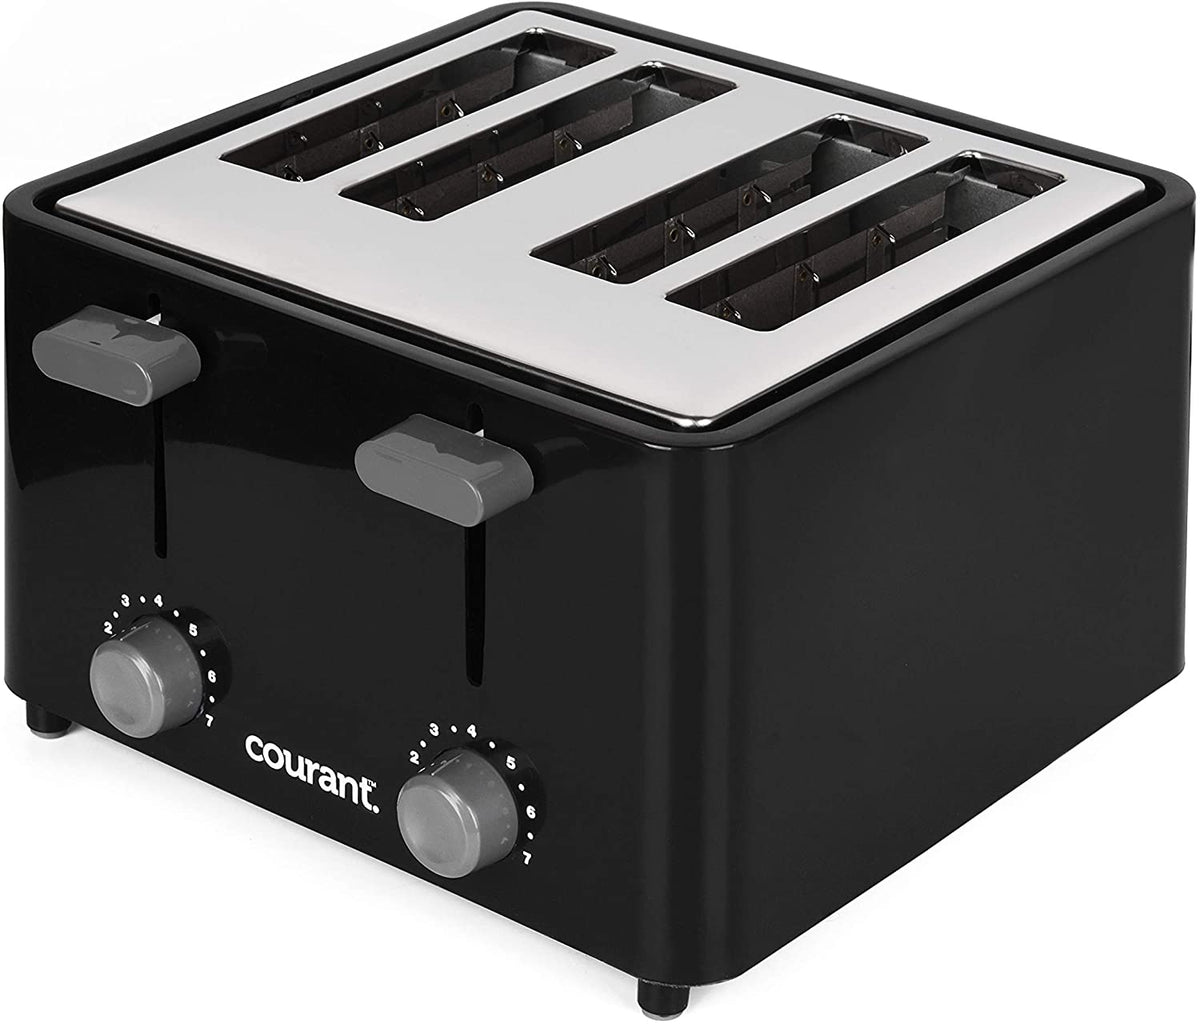 Courant - 4 Slice Toaster with Drop Down Crumb Tray for Easy Cleaning, Black